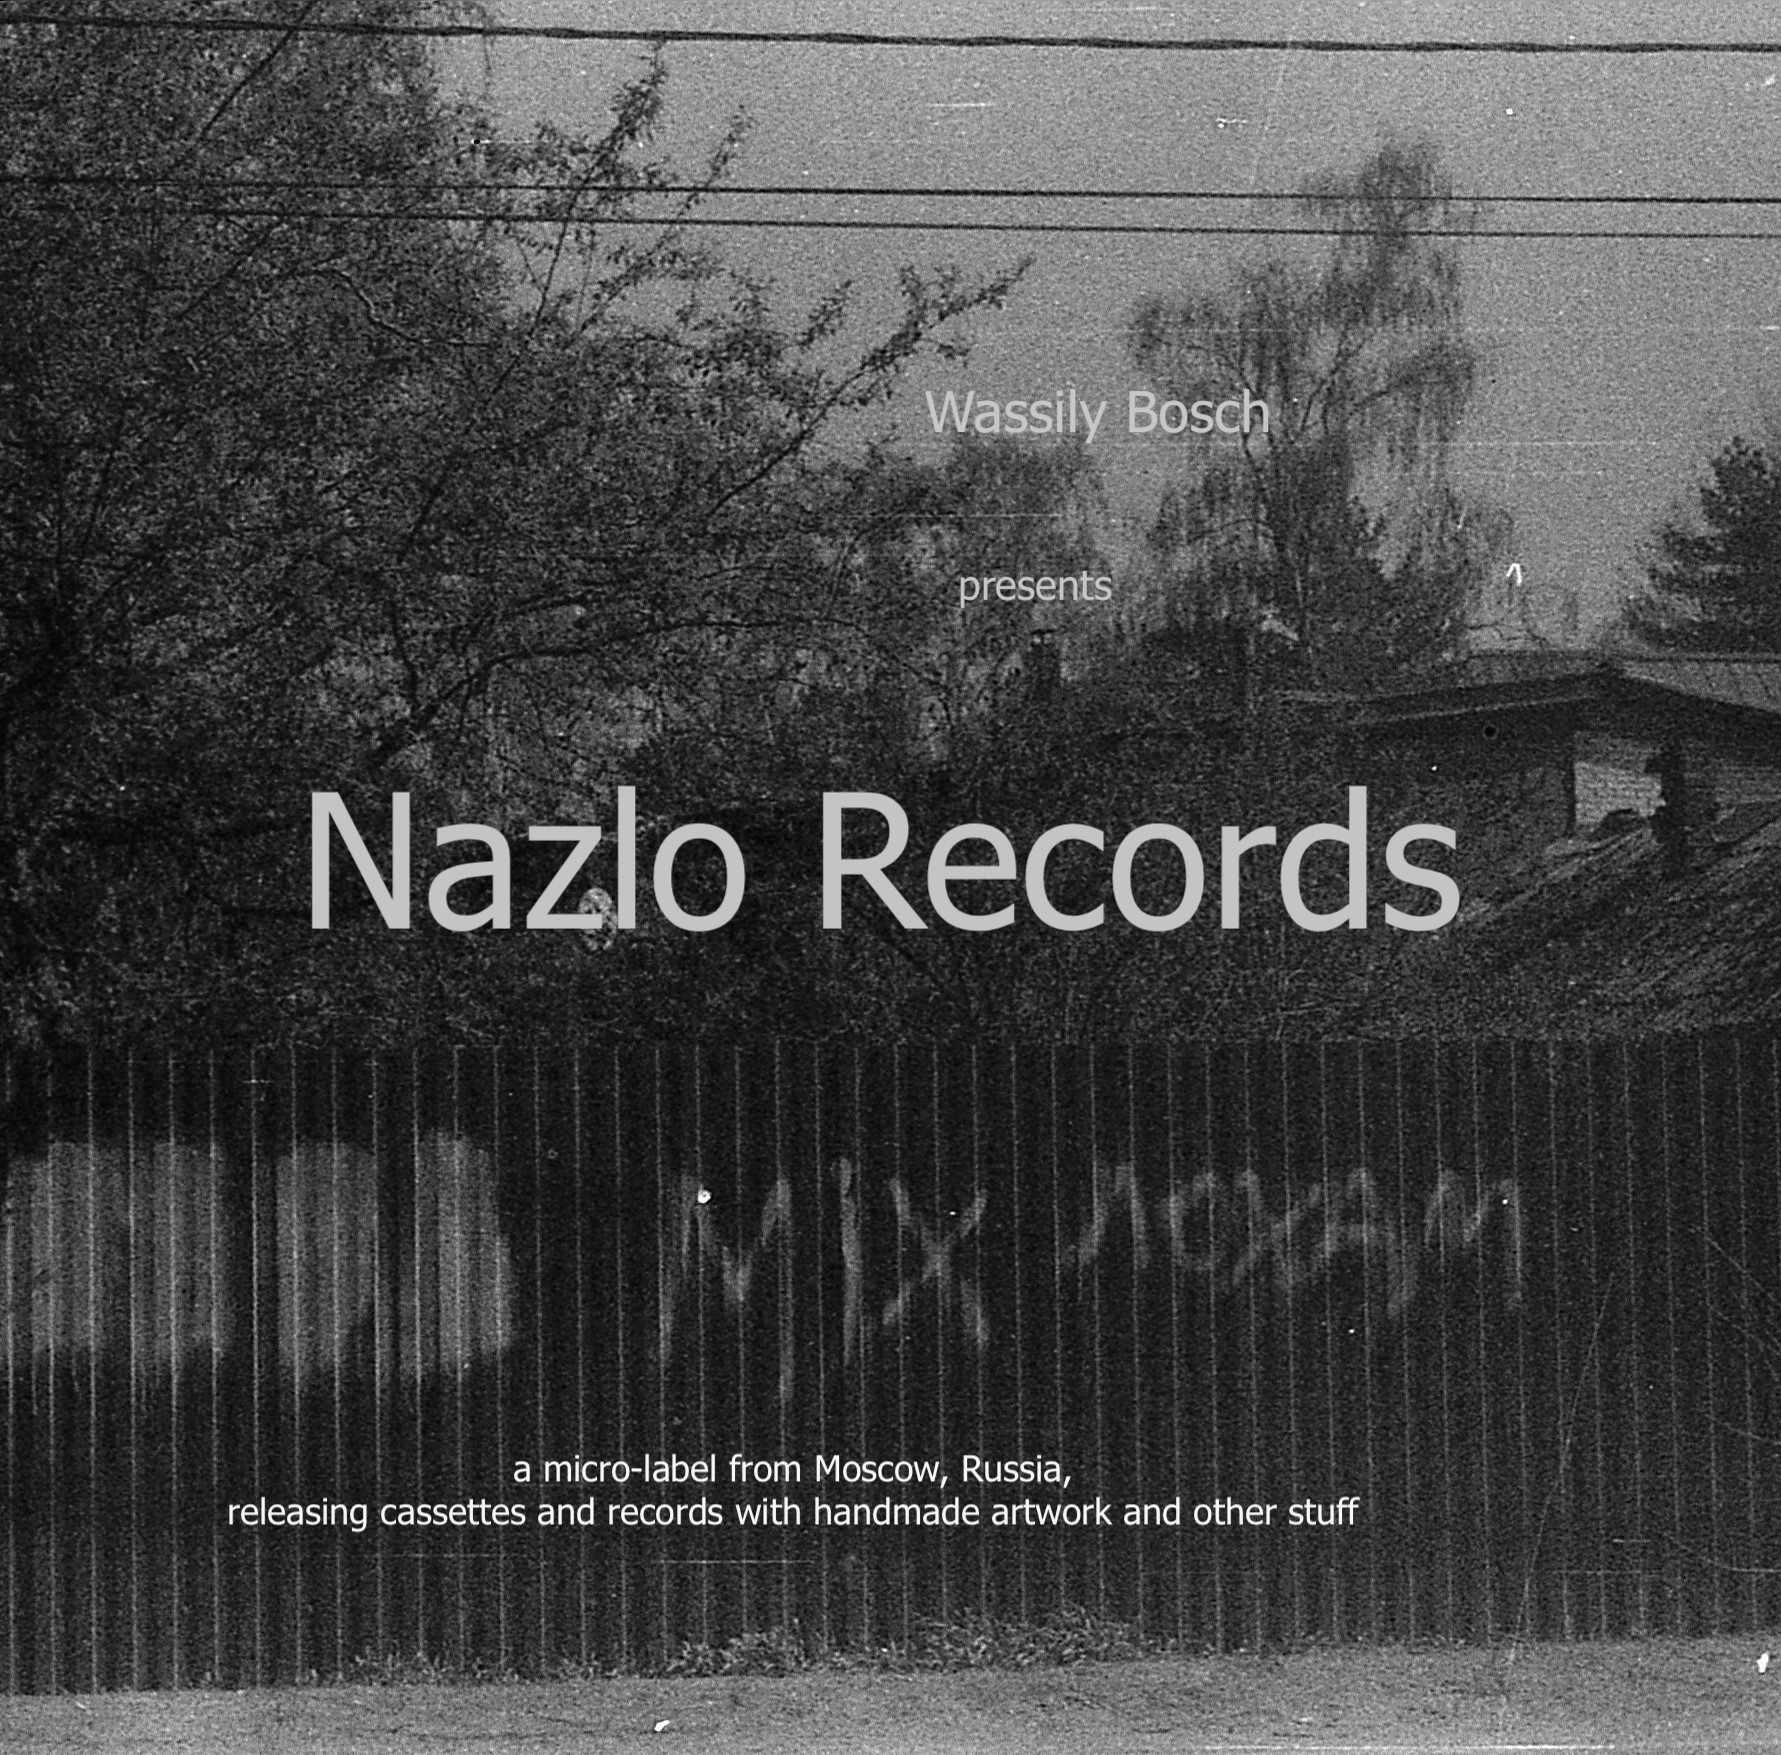 Wassily Bosch presents Nazlo Records